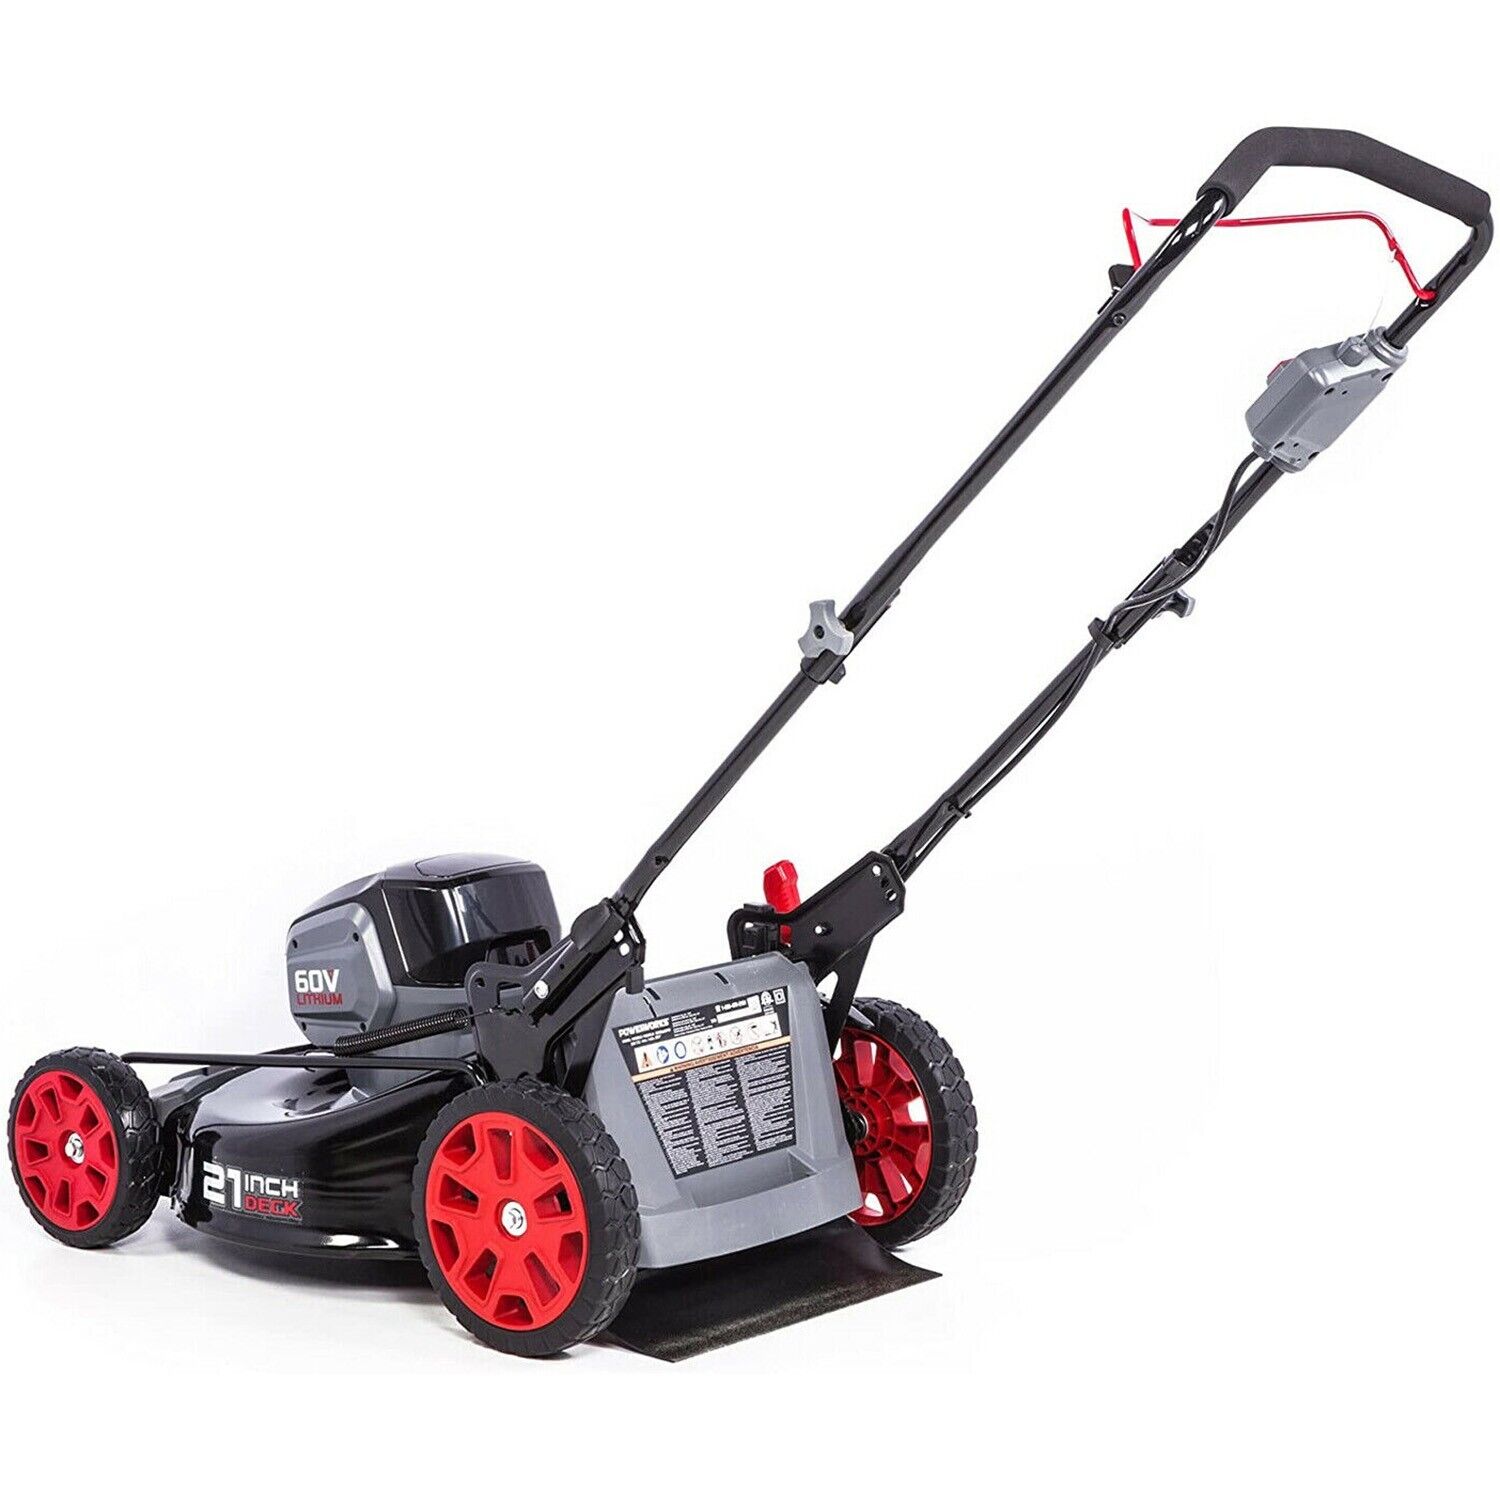 POWERWORKS 60V 21 Inch Cordless Lawn Mower Brushless Motor with